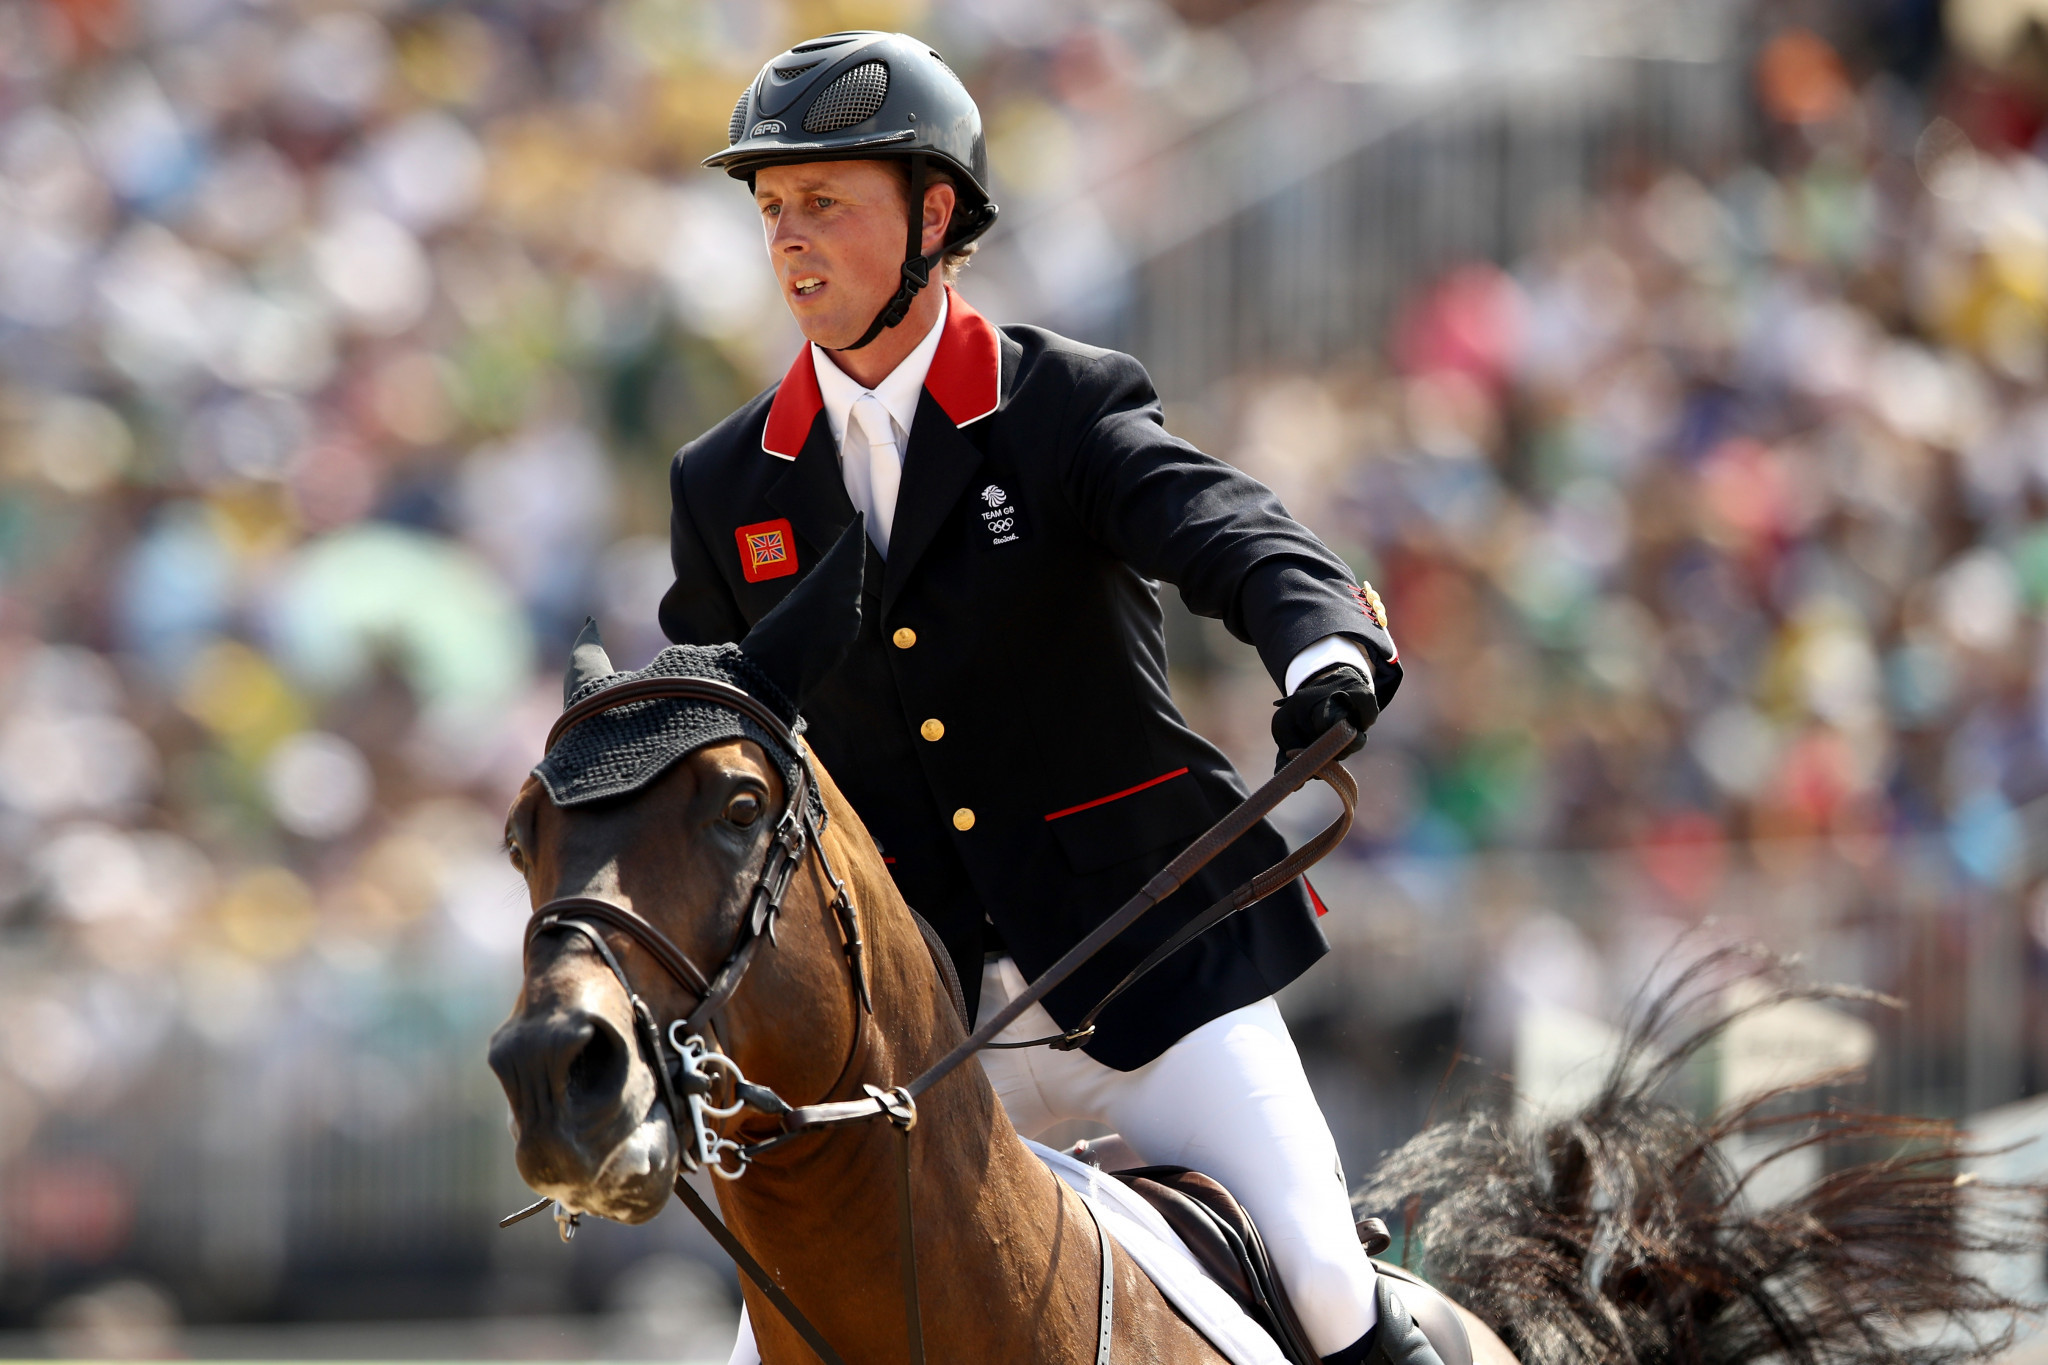 Britain's Ben Maher will be hoping to regain the lead in the LGCT rankings ©Getty Images